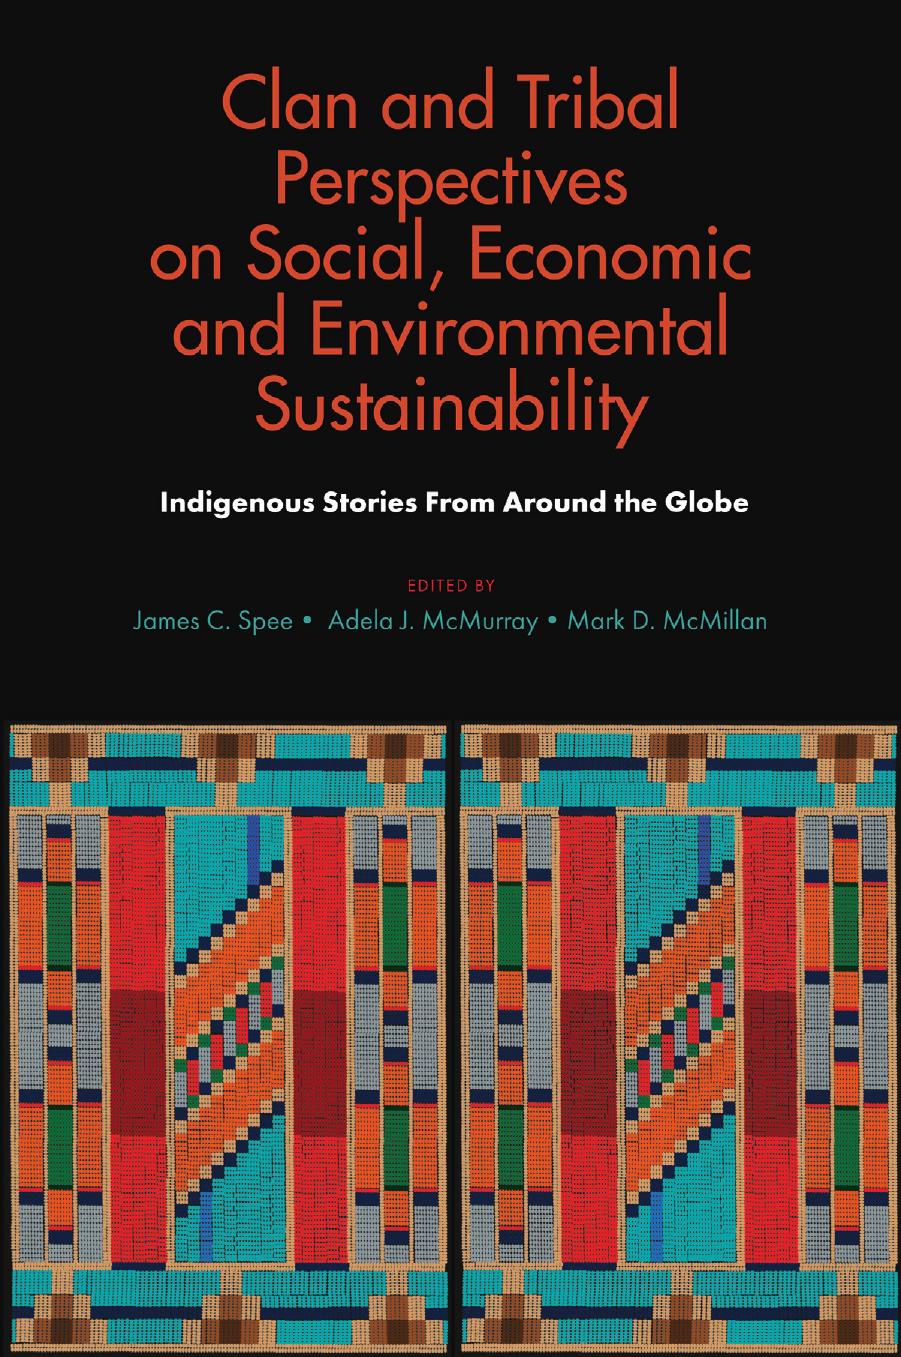 Clan and Tribal Perspectives on Social, Economic and Environmental Sustainability: Indigenous Stories from Around the Globe by James C. Spee Adela J. McMurray Mark D. McMillan